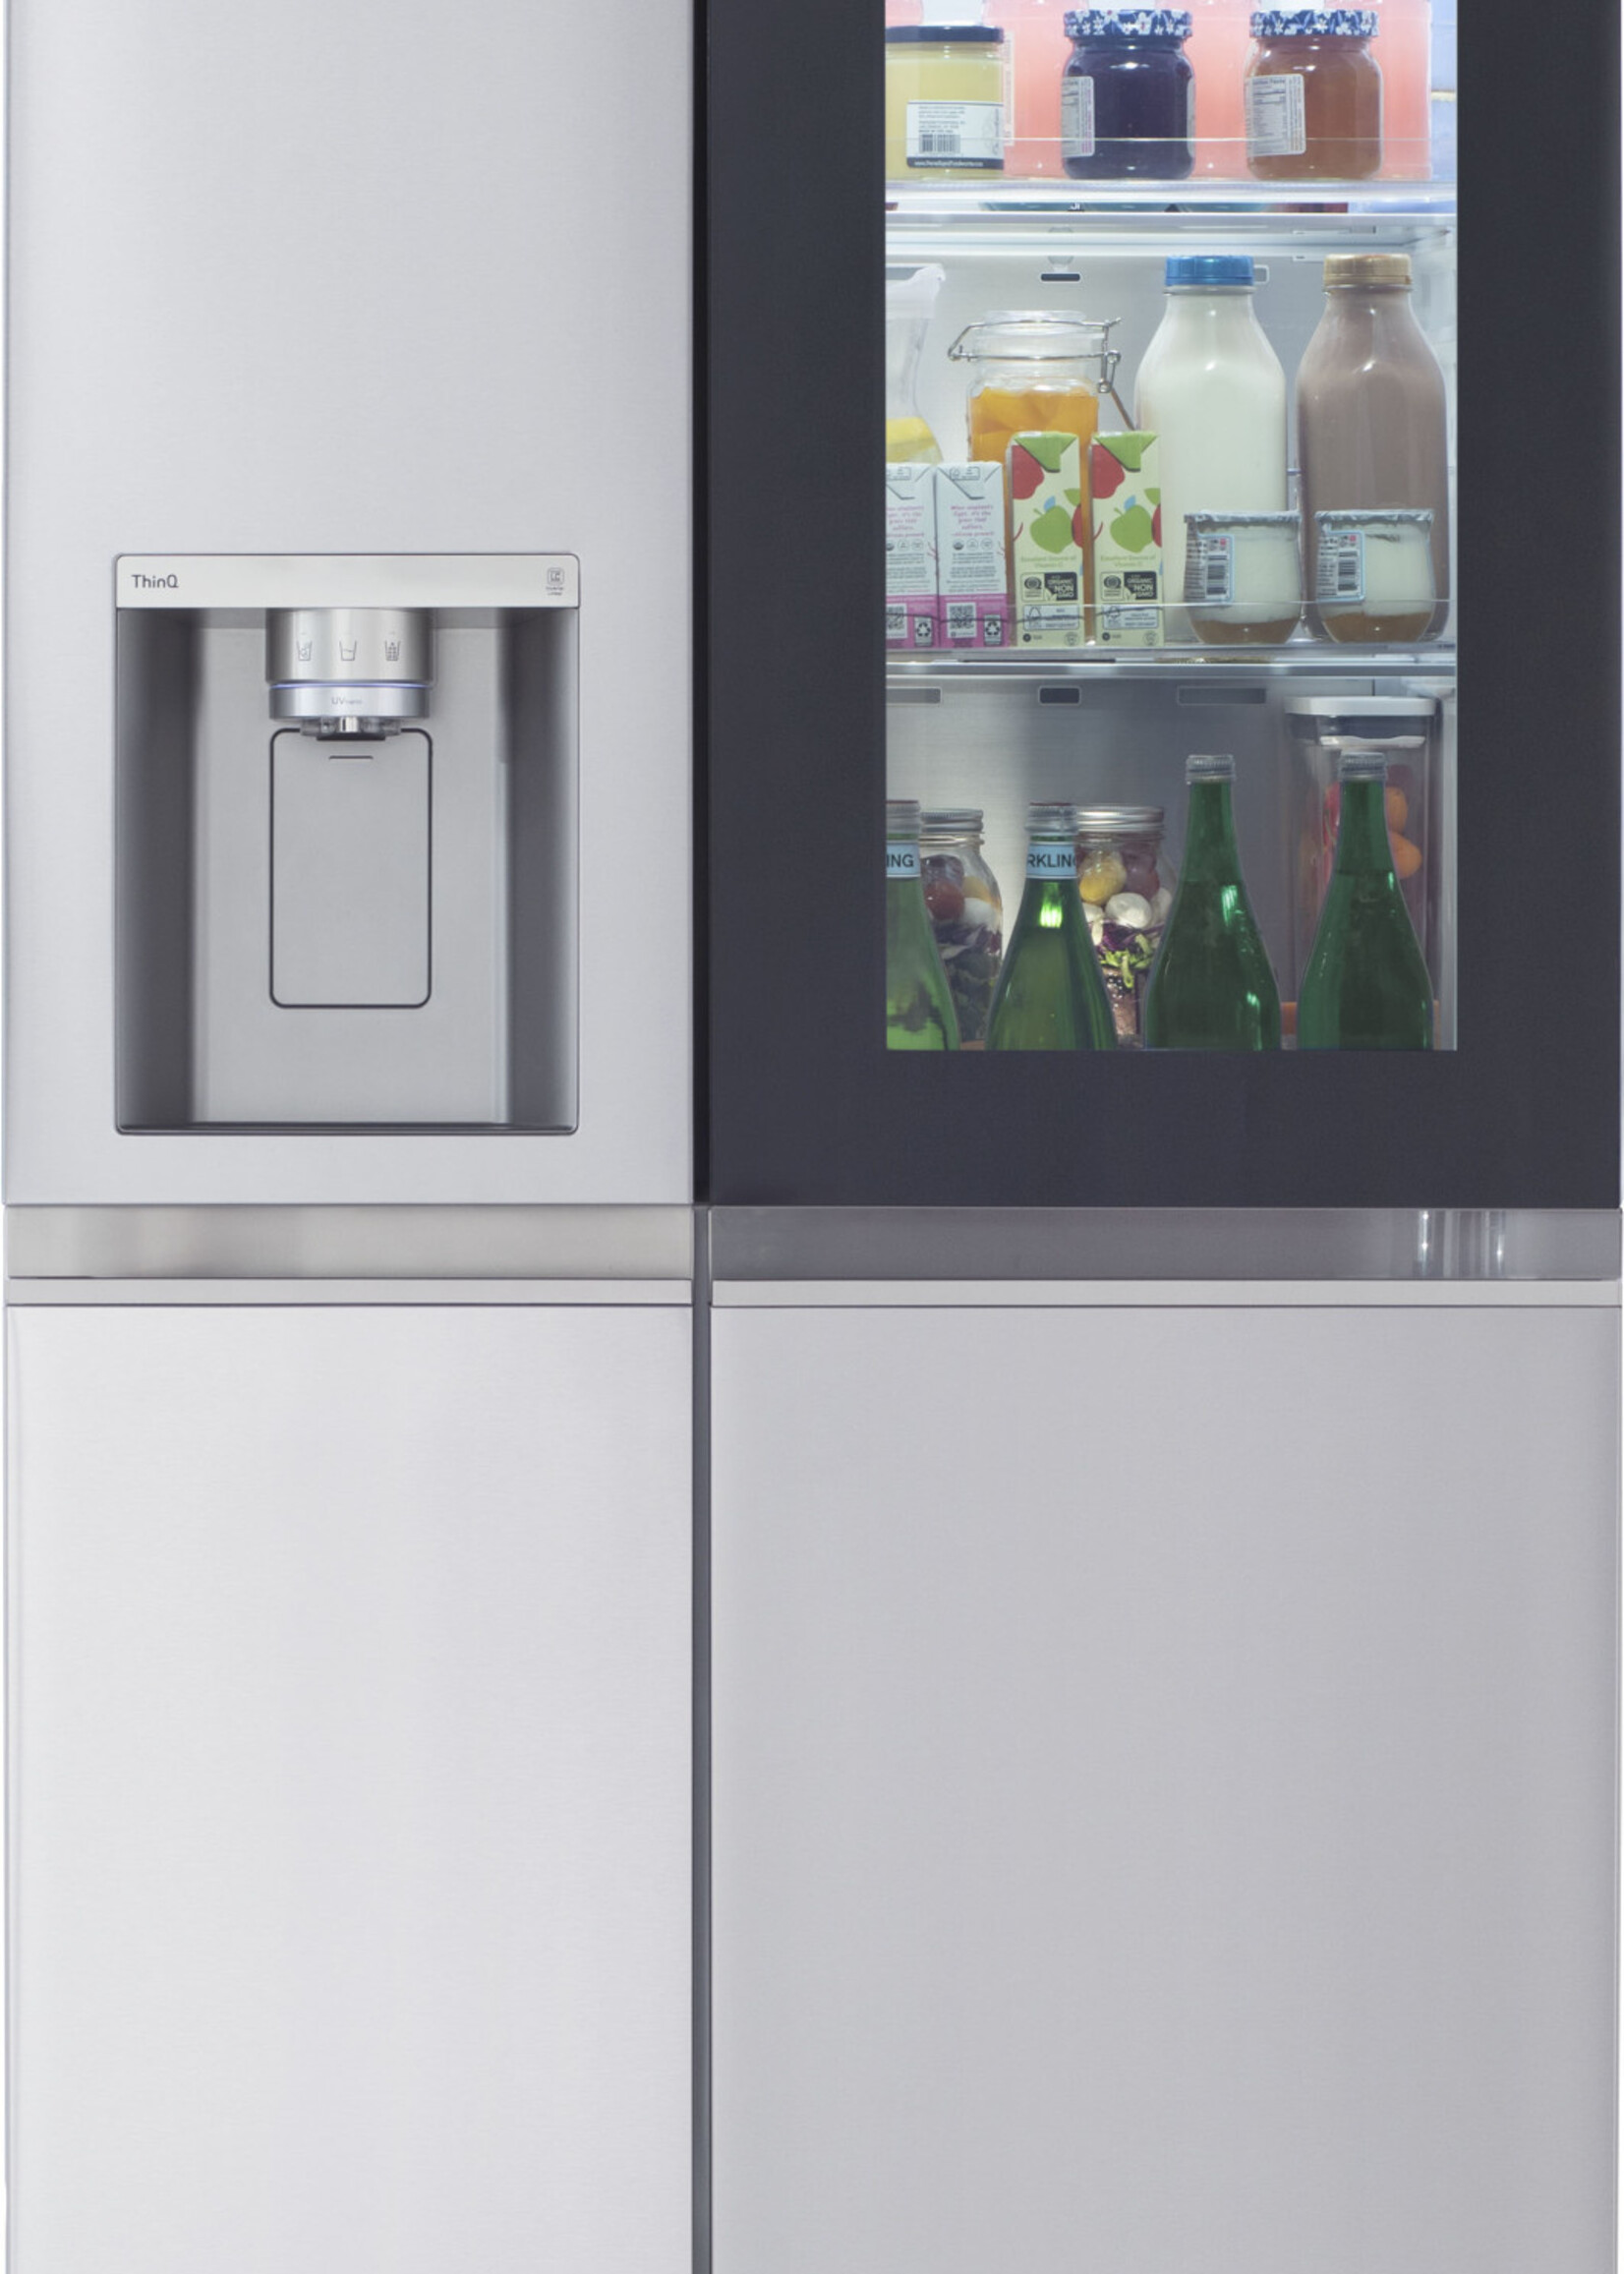 LG ***Damage Special LG LRSOS2706S  InstaView 27.1-cu ft Side-by-Side Refrigerator with Dual Ice Maker (Printproof Stainless Steel) ENERGY STAR